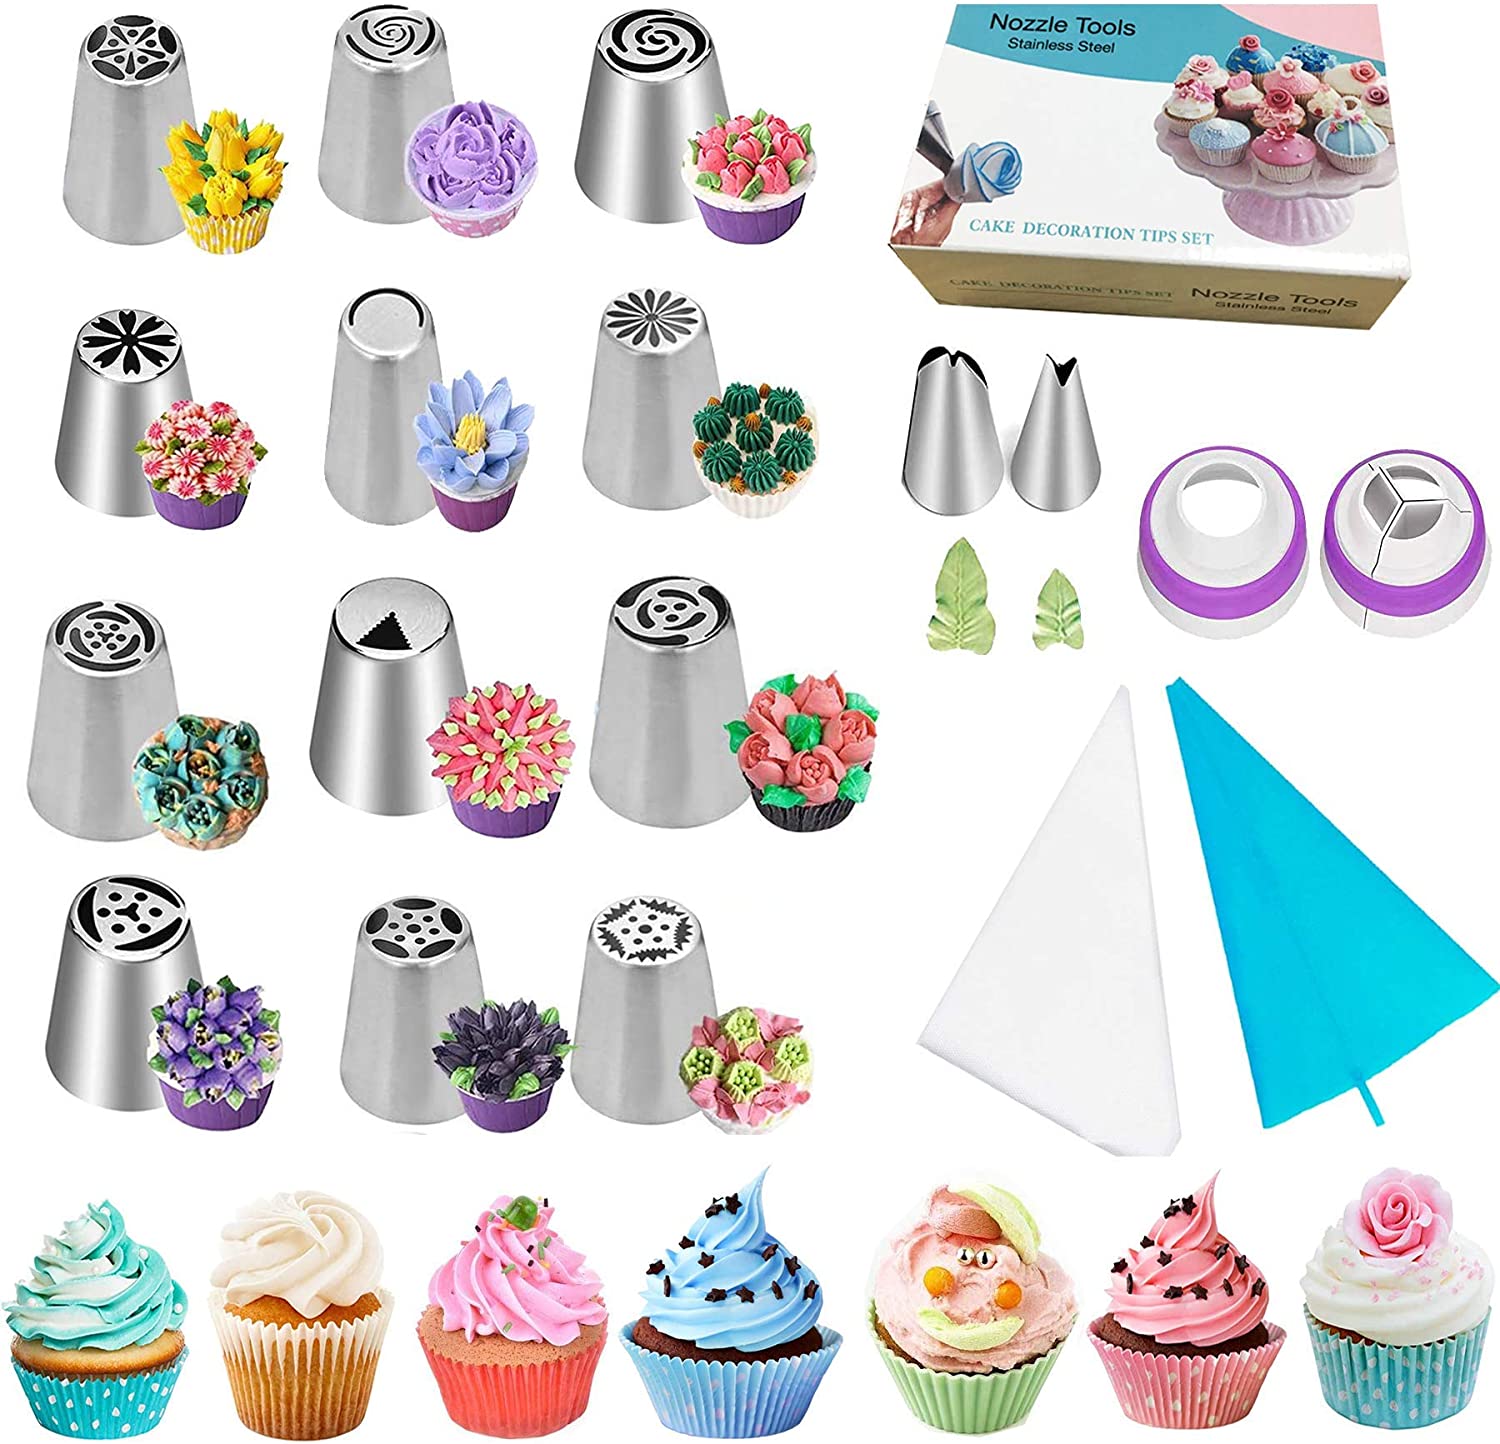 13pcs/Set Cake Decorating Equipment Icing Decoration Kit Russian Piping Nozzles Silicone Pastry Bags Tool Piping Cream Stainless Steel Nozzles Decorator Pastry Cream Making Set for Dessert Cupcakes 